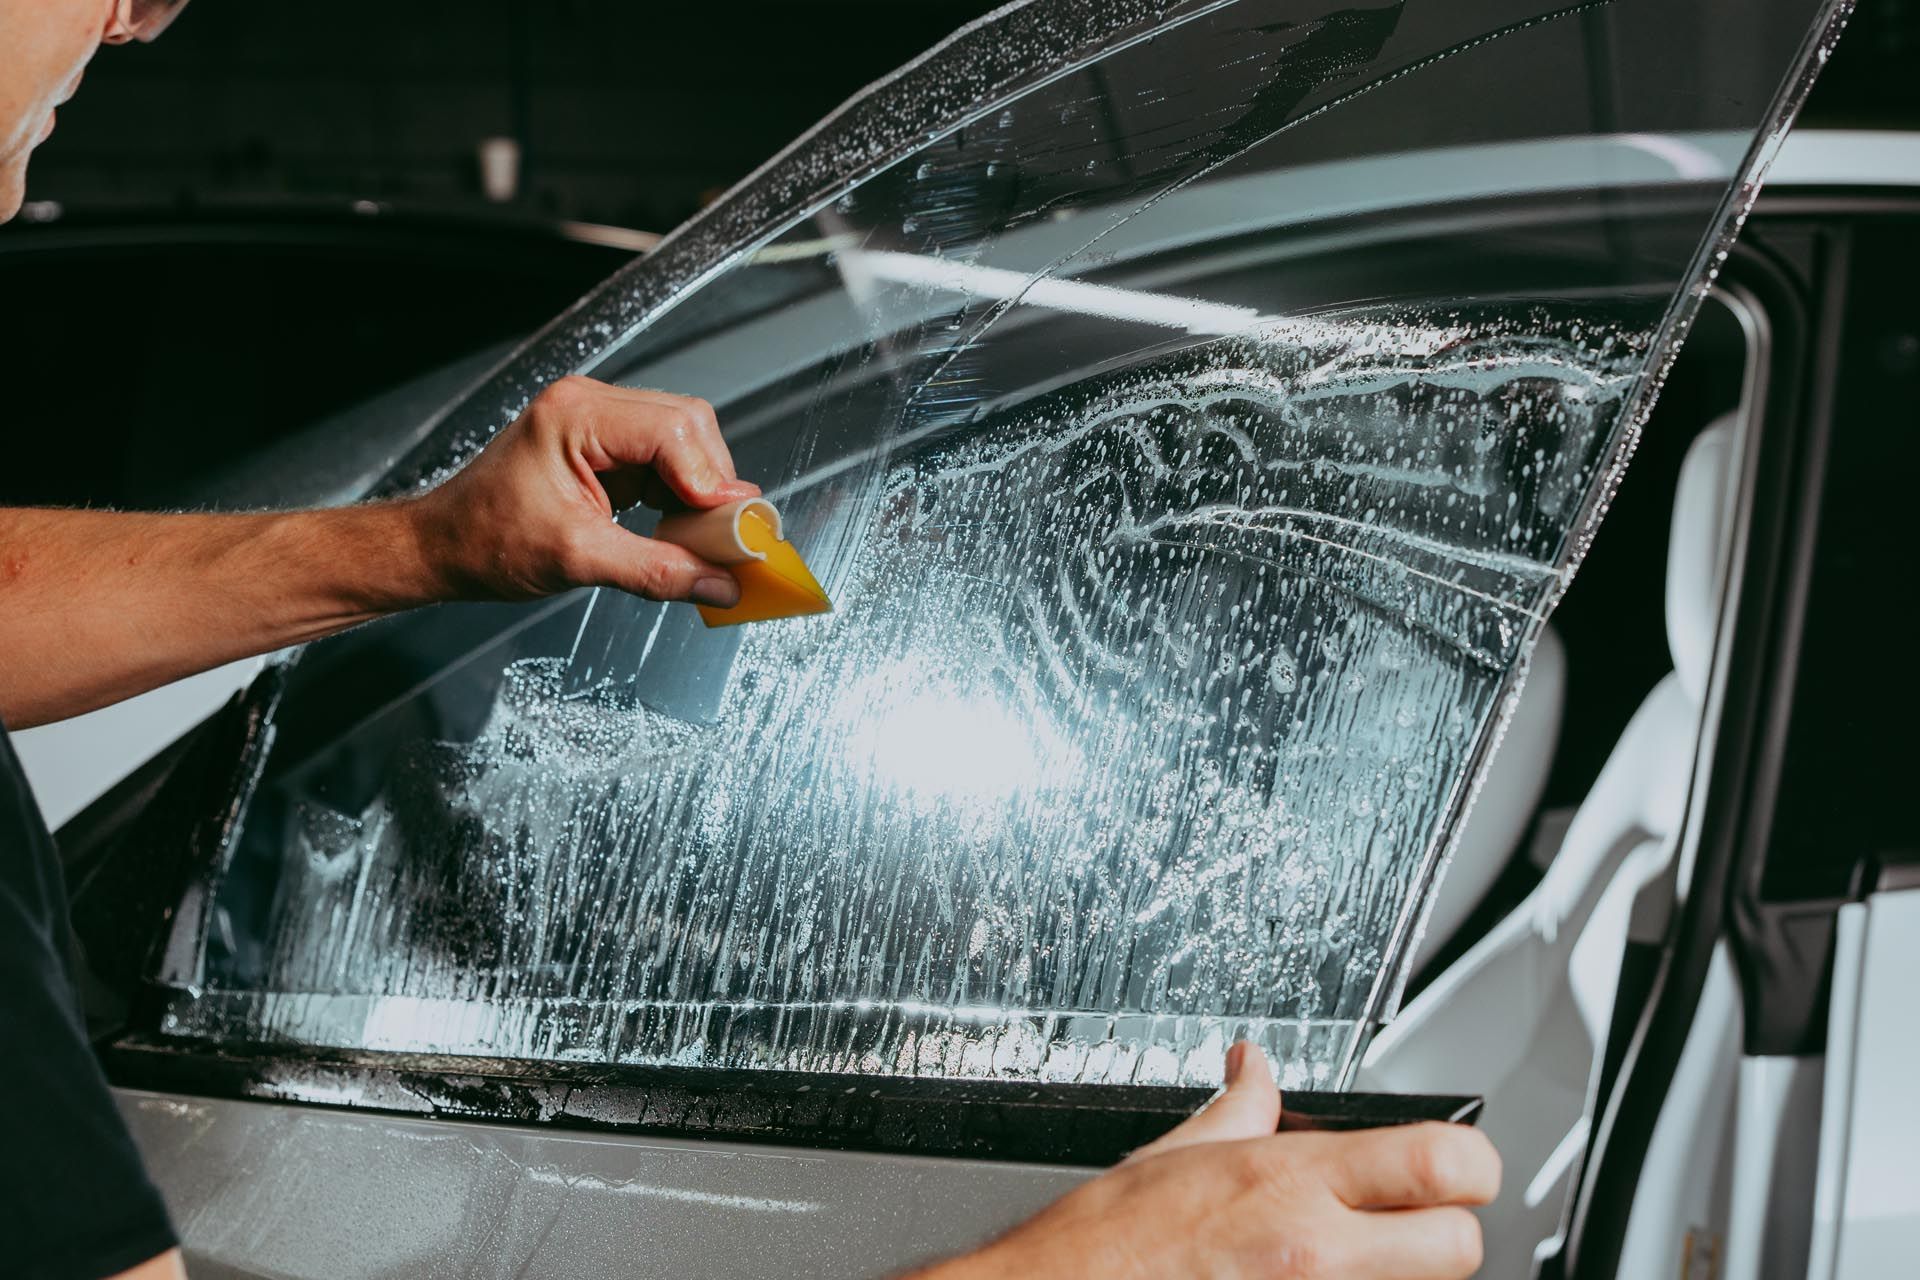 Window Tint - A man is cleaning a car window with a yellow sponge